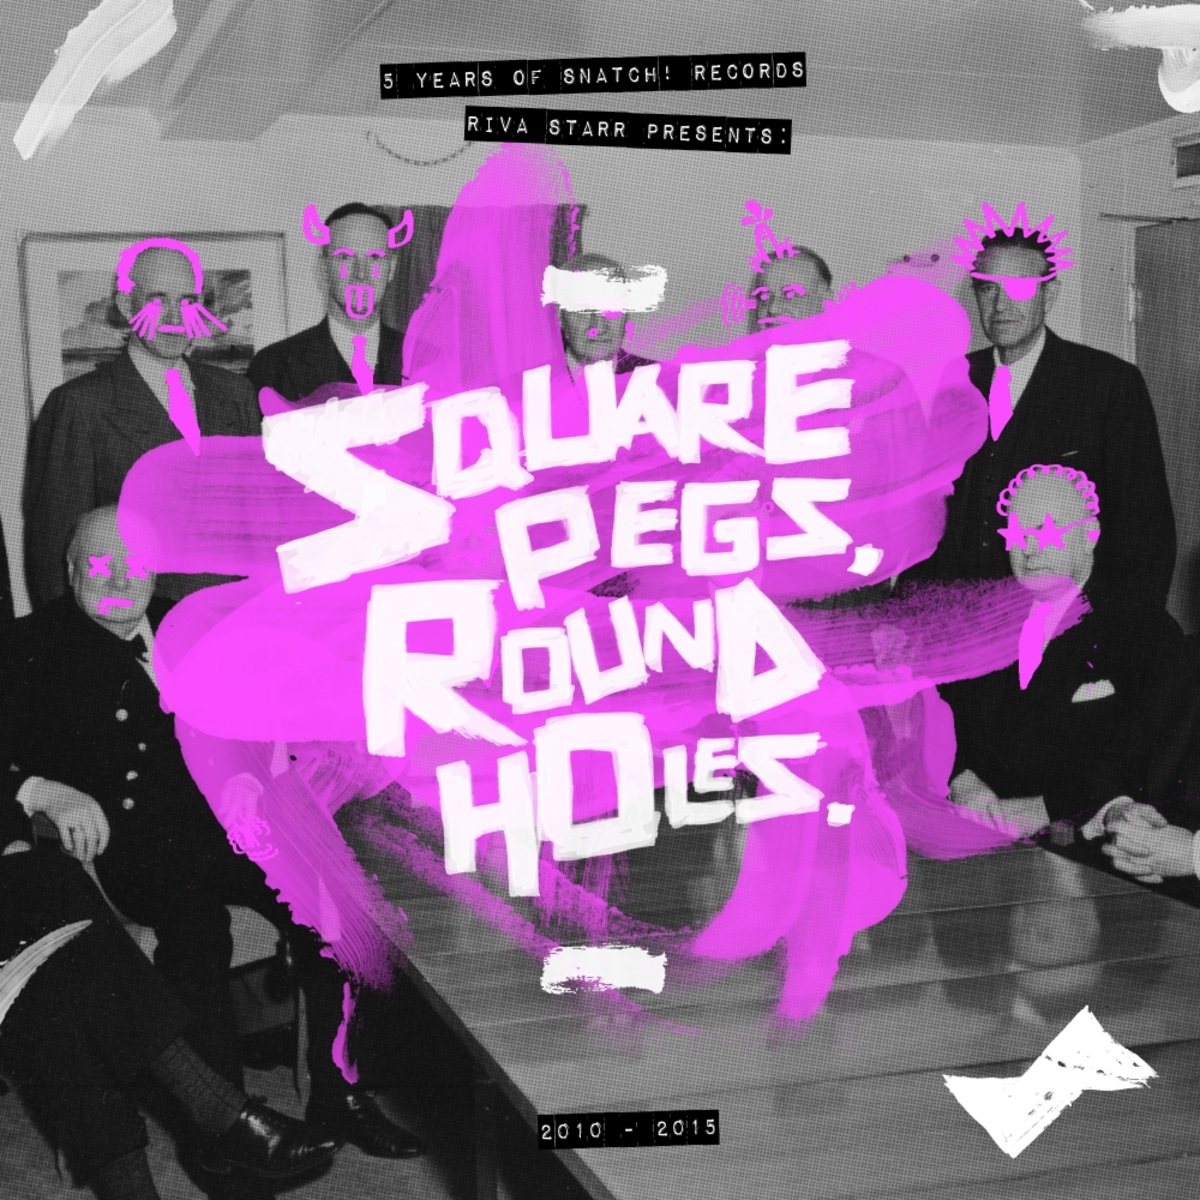 VA - Riva Starr Presents Square Pegs, Round Holes - 5 Years Of Snatch! / Snatch! Records